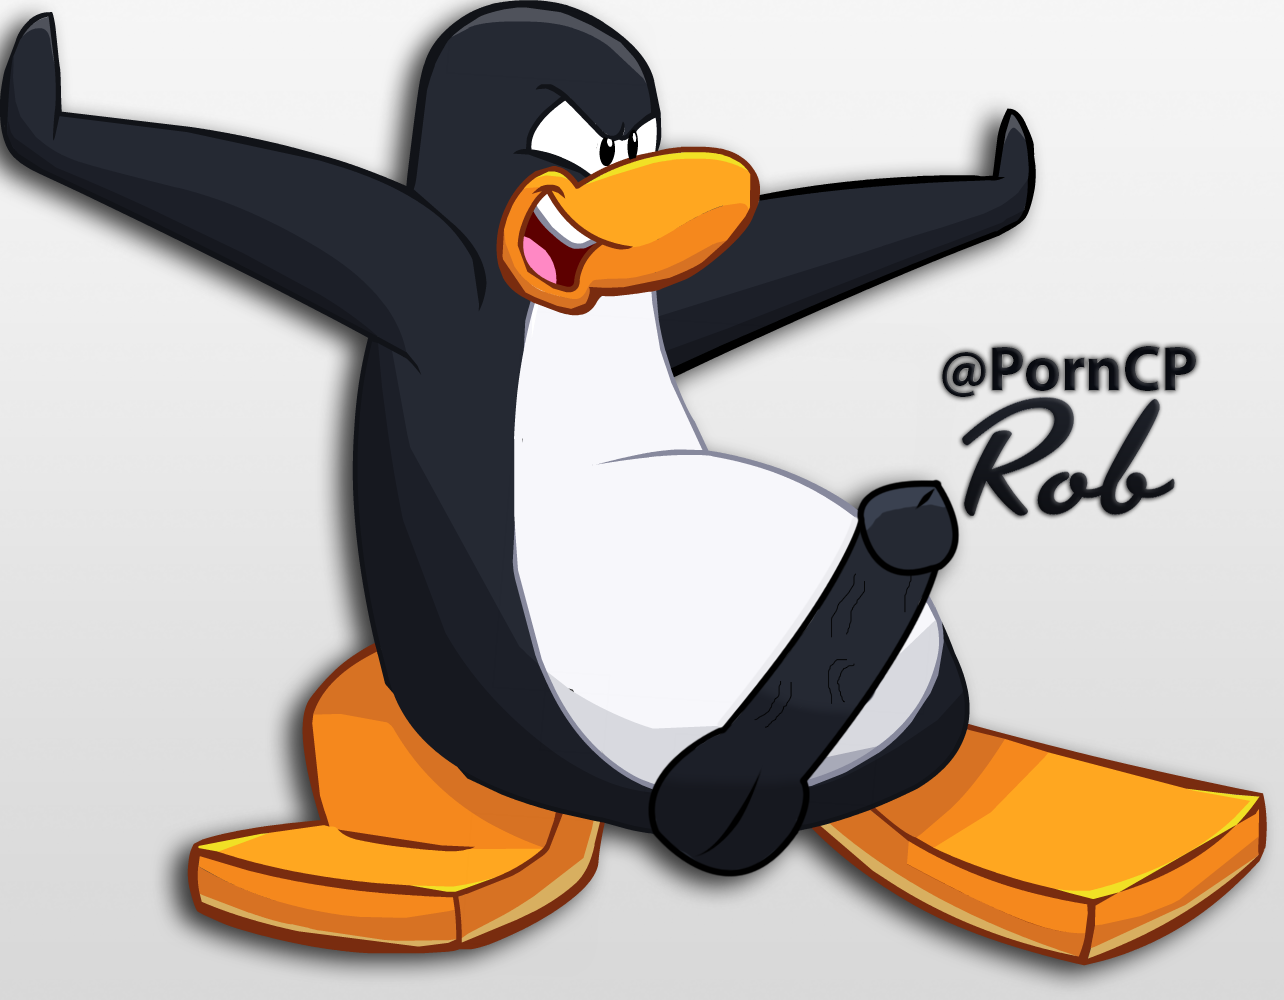 Club Penguin Porn auf Twitter: "This is our 2nd model, Rob. 